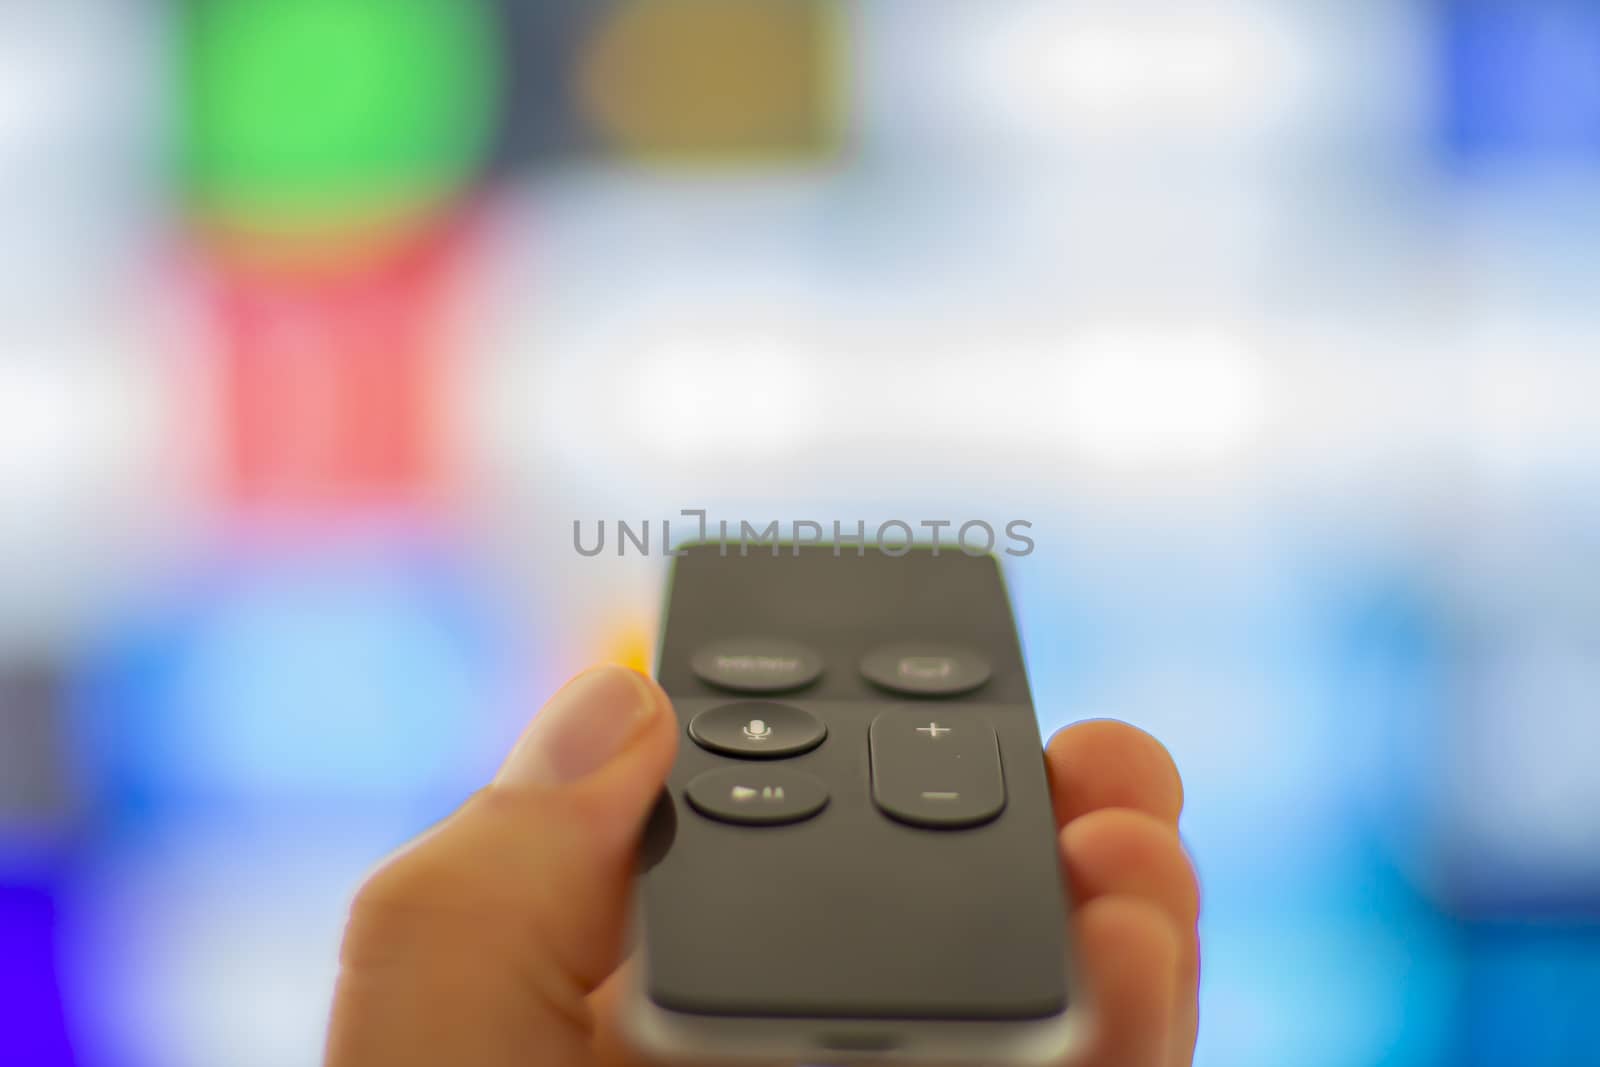 Close up of a person holding a digital media player and microconsole remote with a television screen on the background by oasisamuel